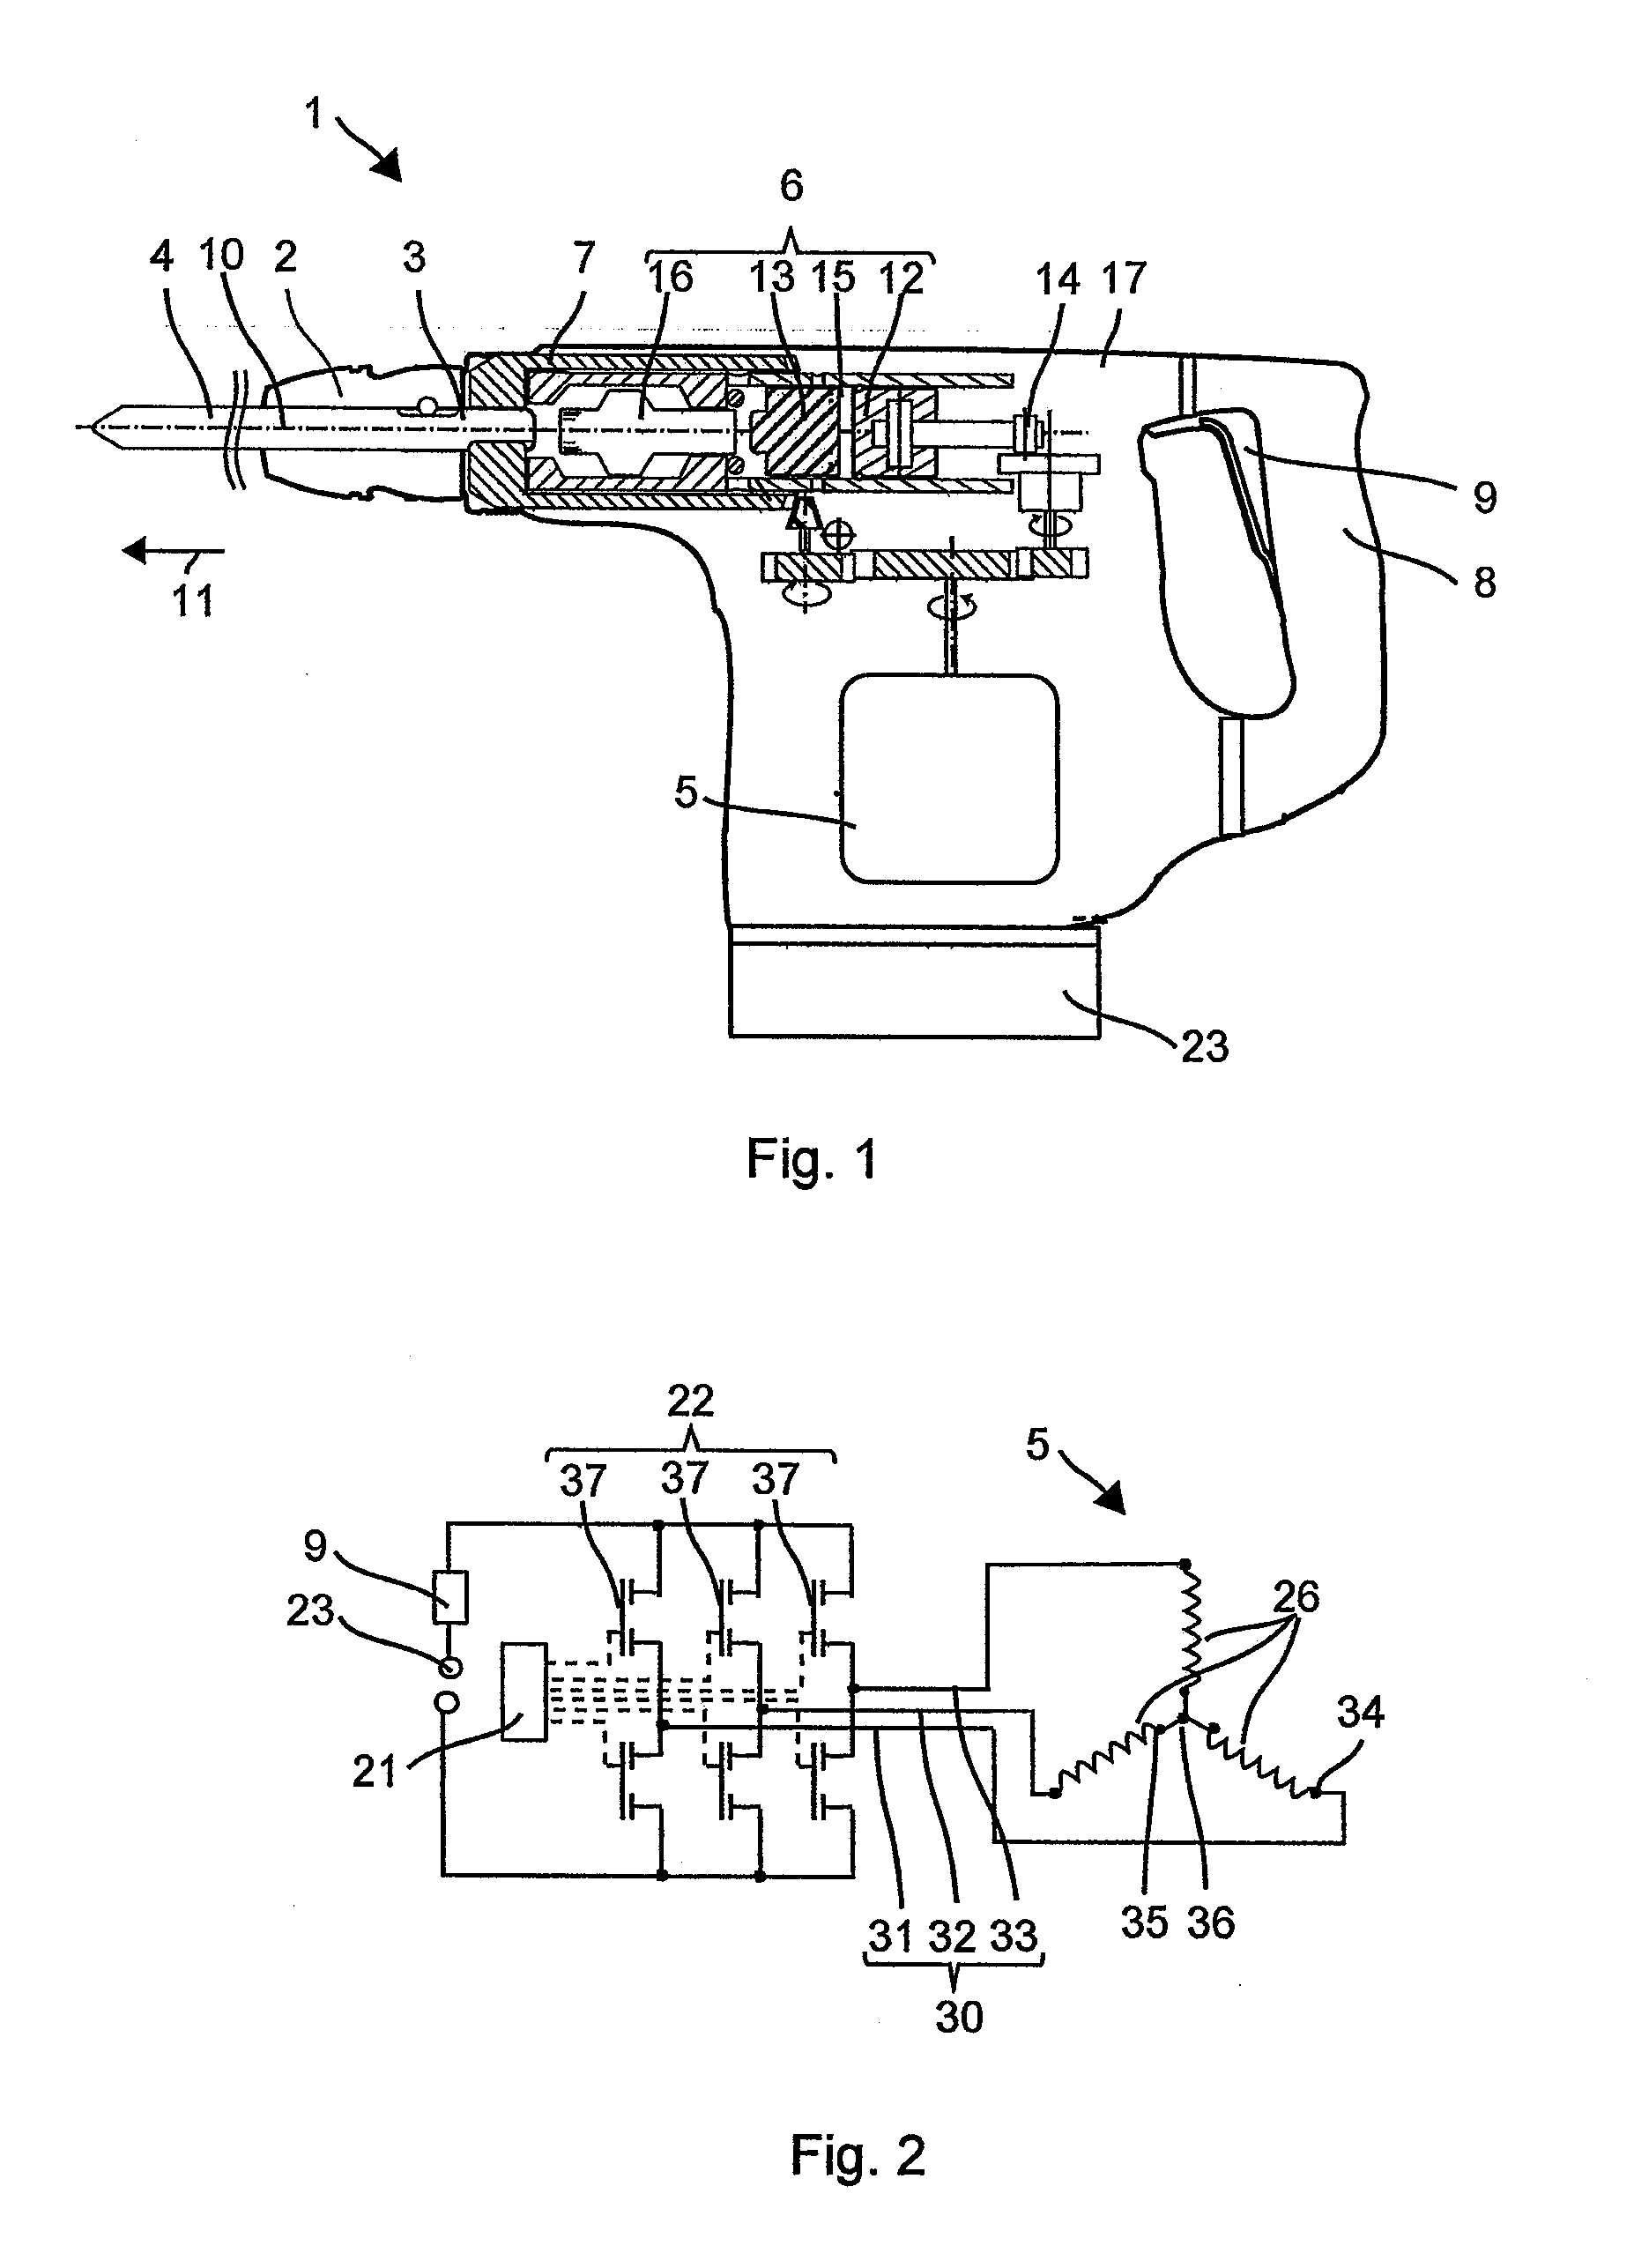 Electric drive for a hand-held power tool